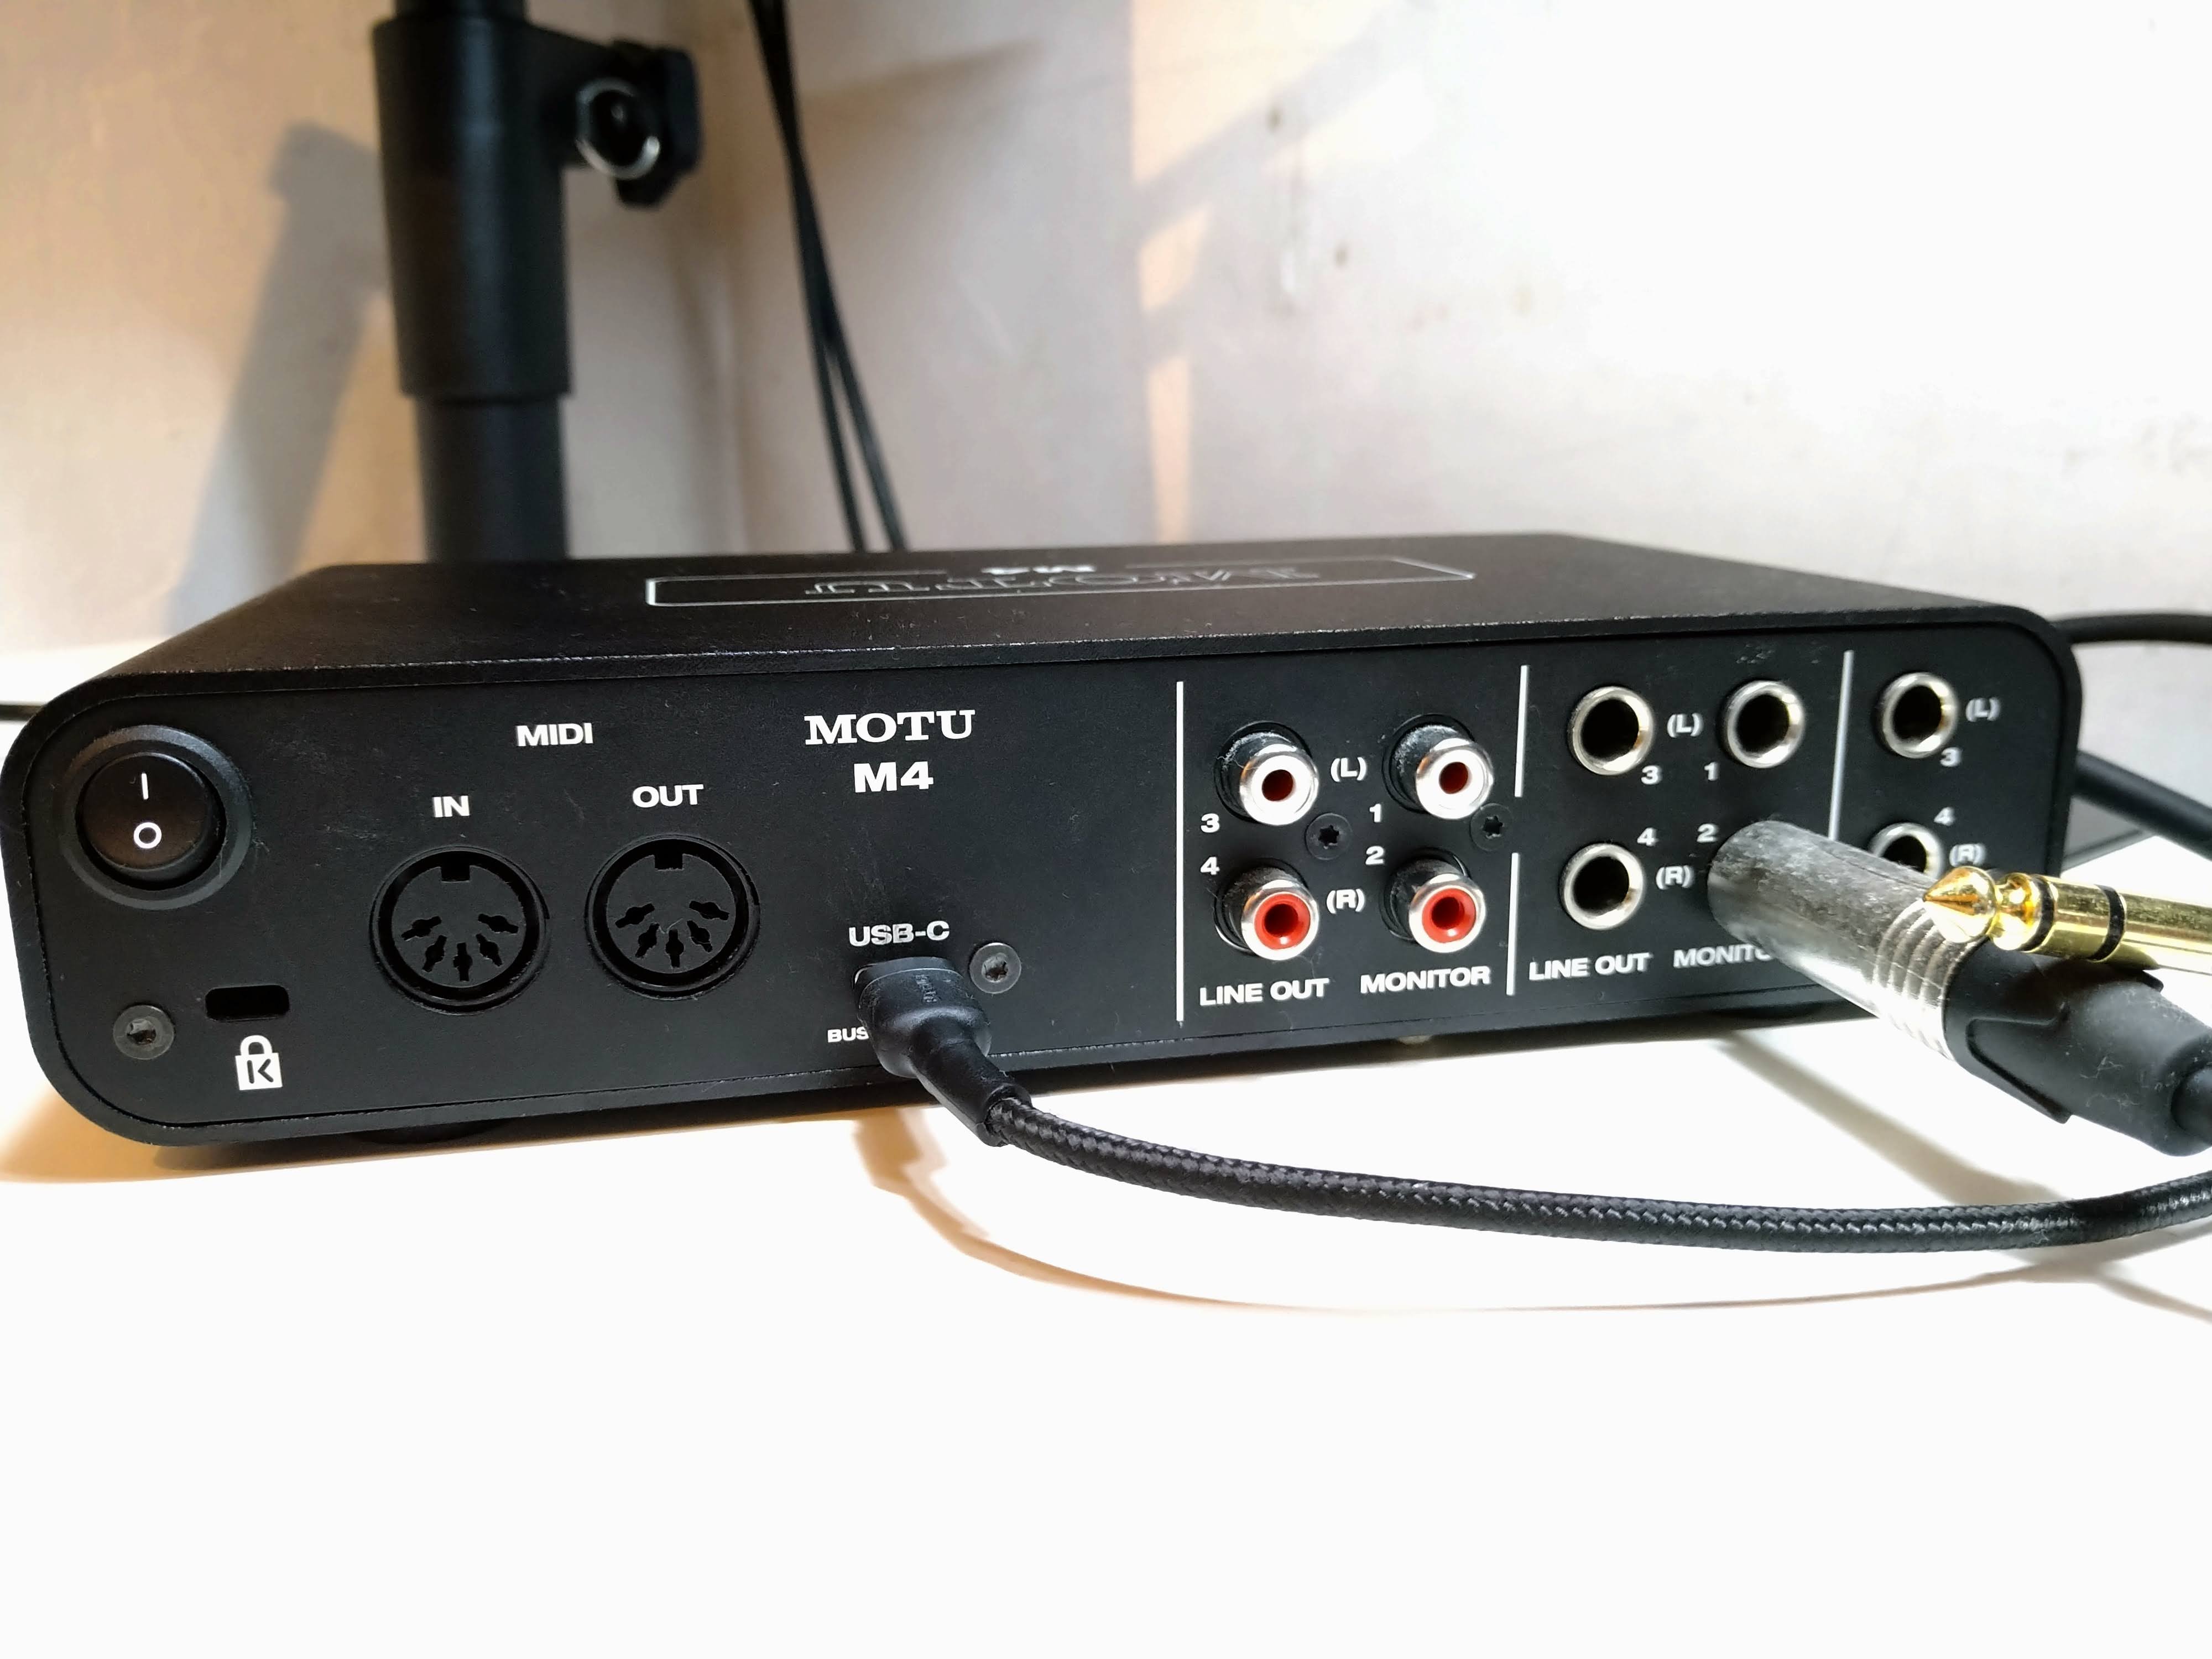 Speaker, Line-out and MIDI ports on MoTU M4 with TRS cable for monitors